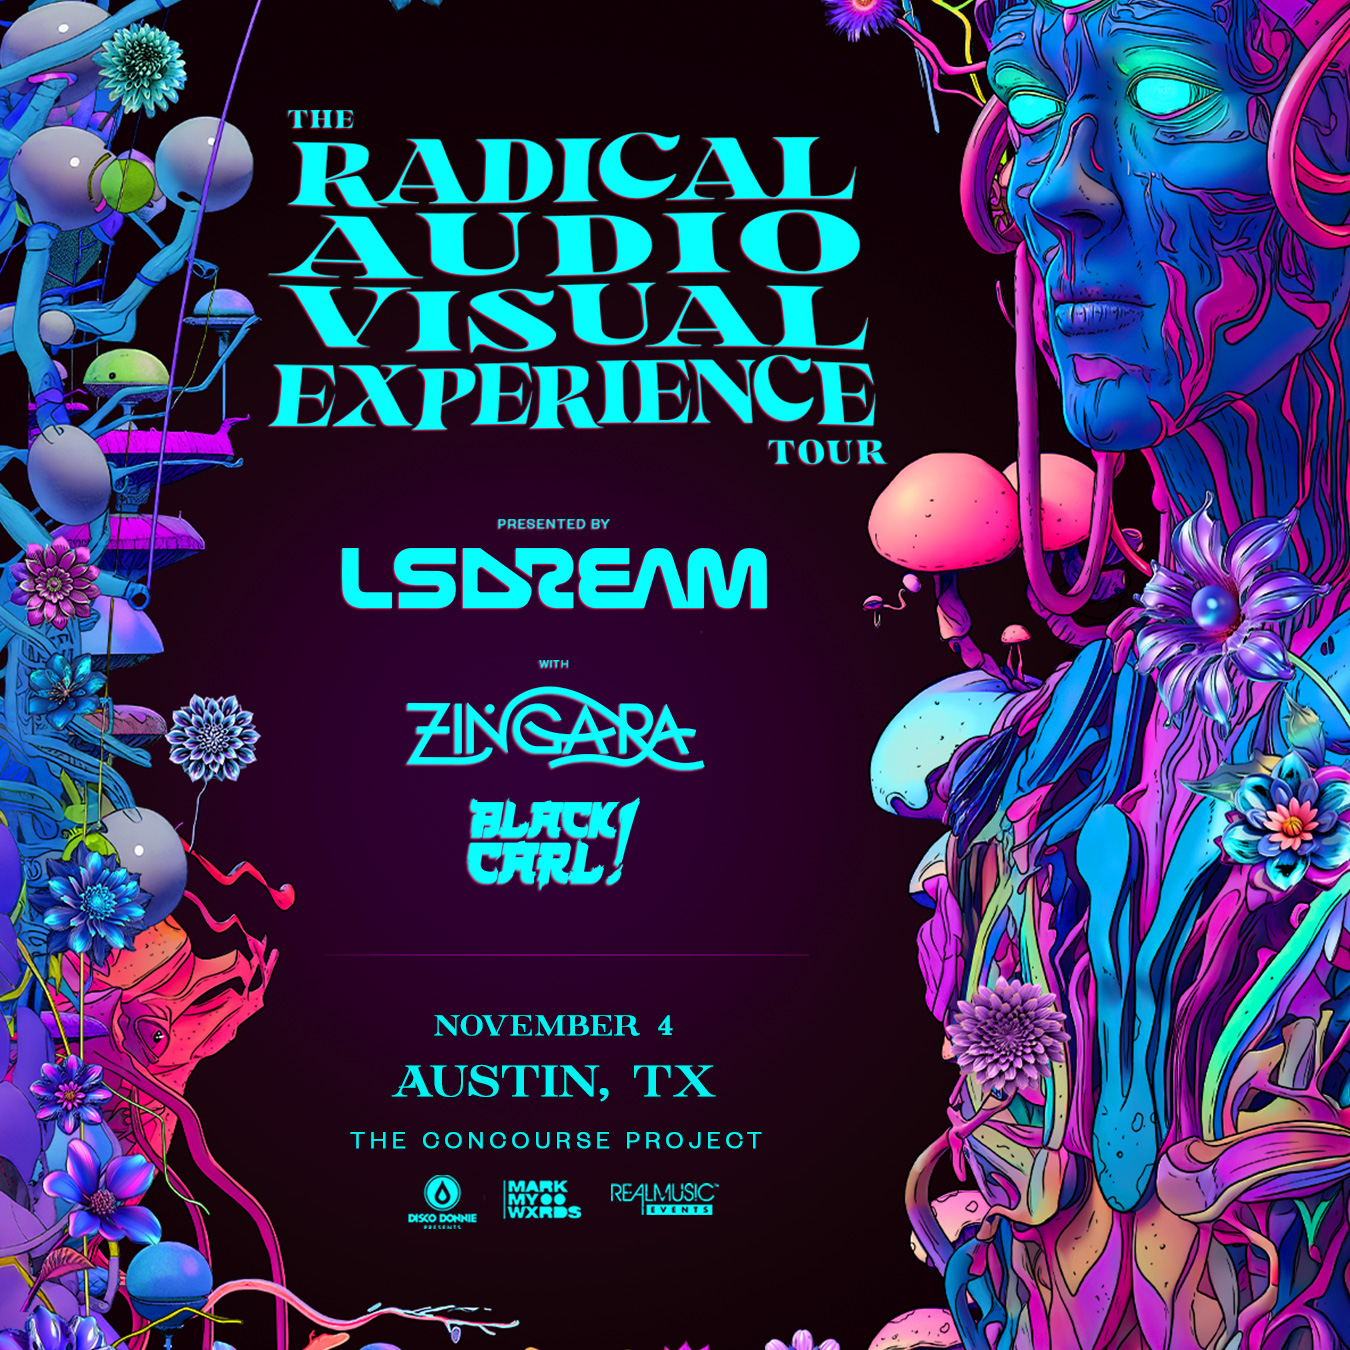 The Radical Audio Visual Experience Presented by LSDREAM